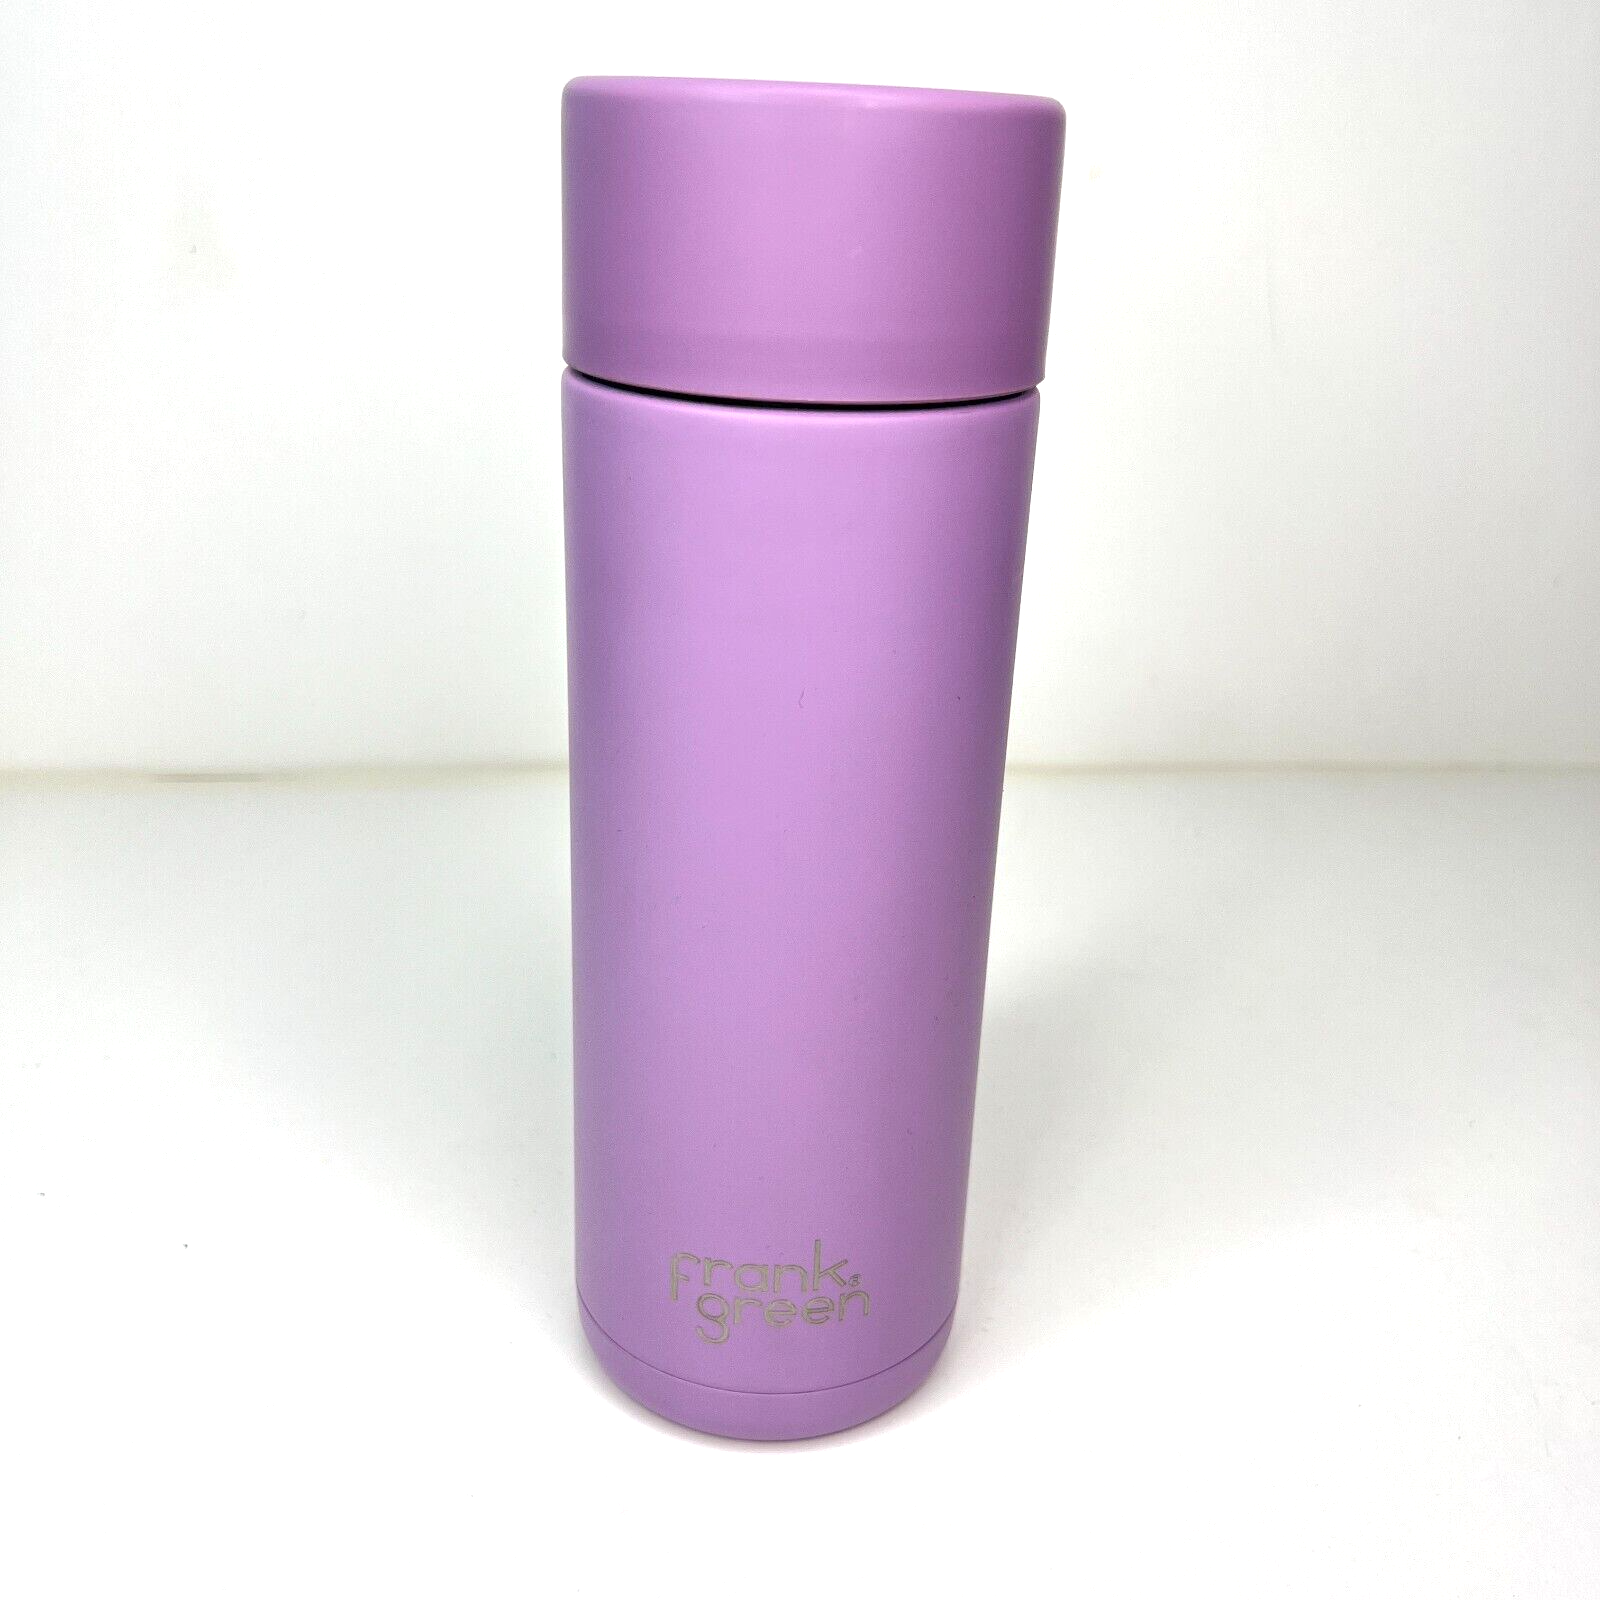 Primary image for Frank Green 20 oz Reusable Water Bottle Ceramic Push Button Lid Lavender NEW